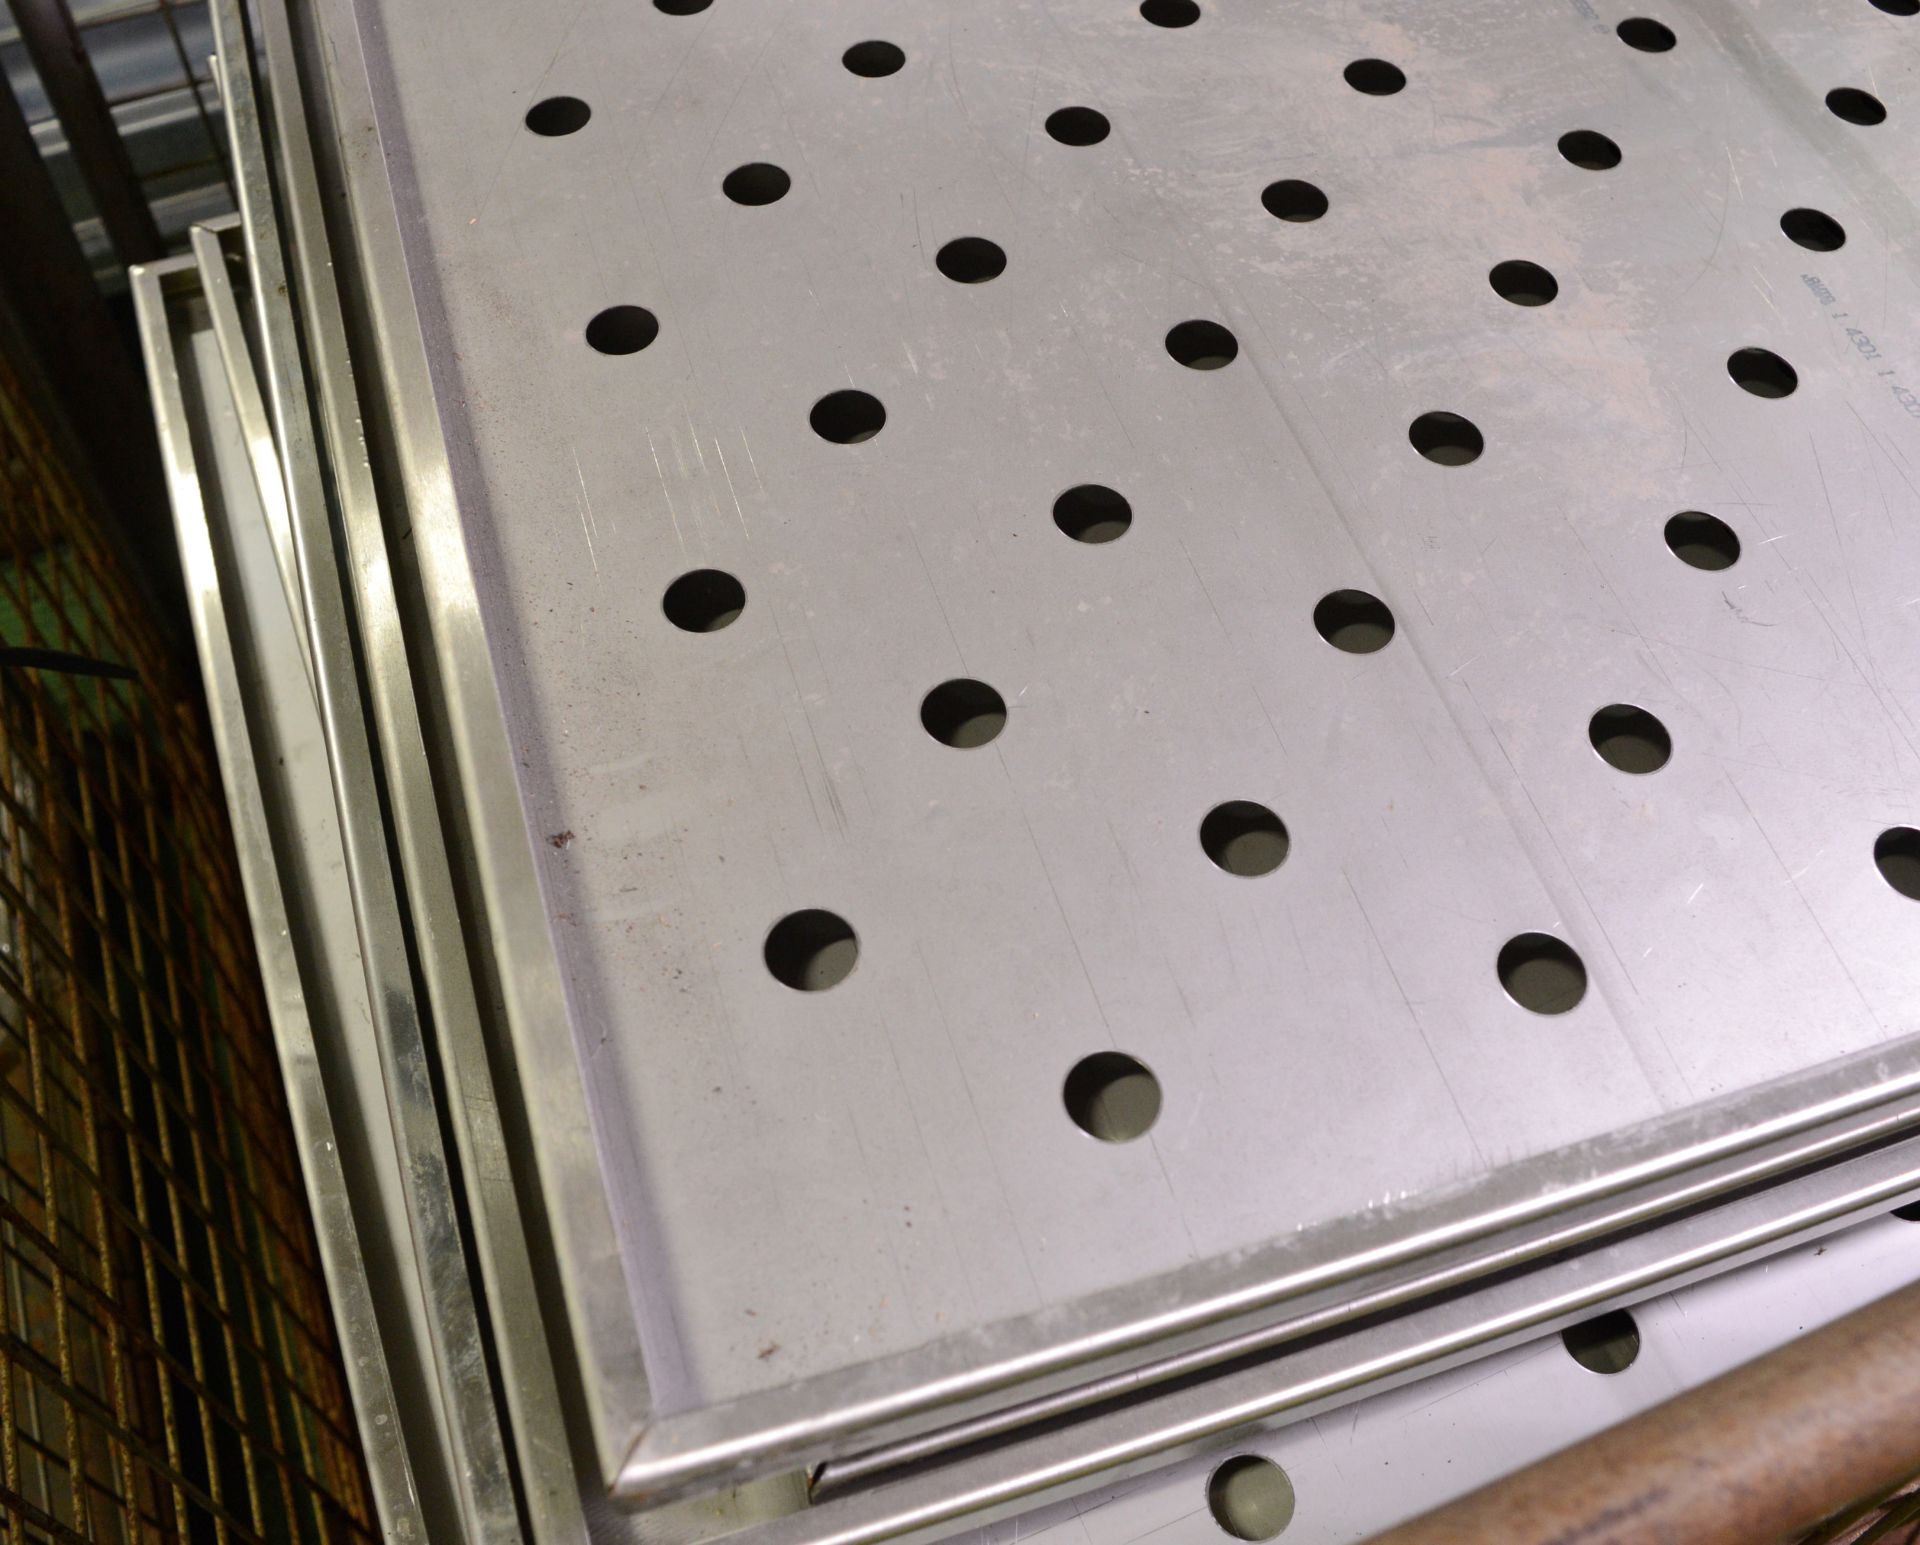 Stainless Steel Perforated Shelves 930 x 655mm. - Image 2 of 2